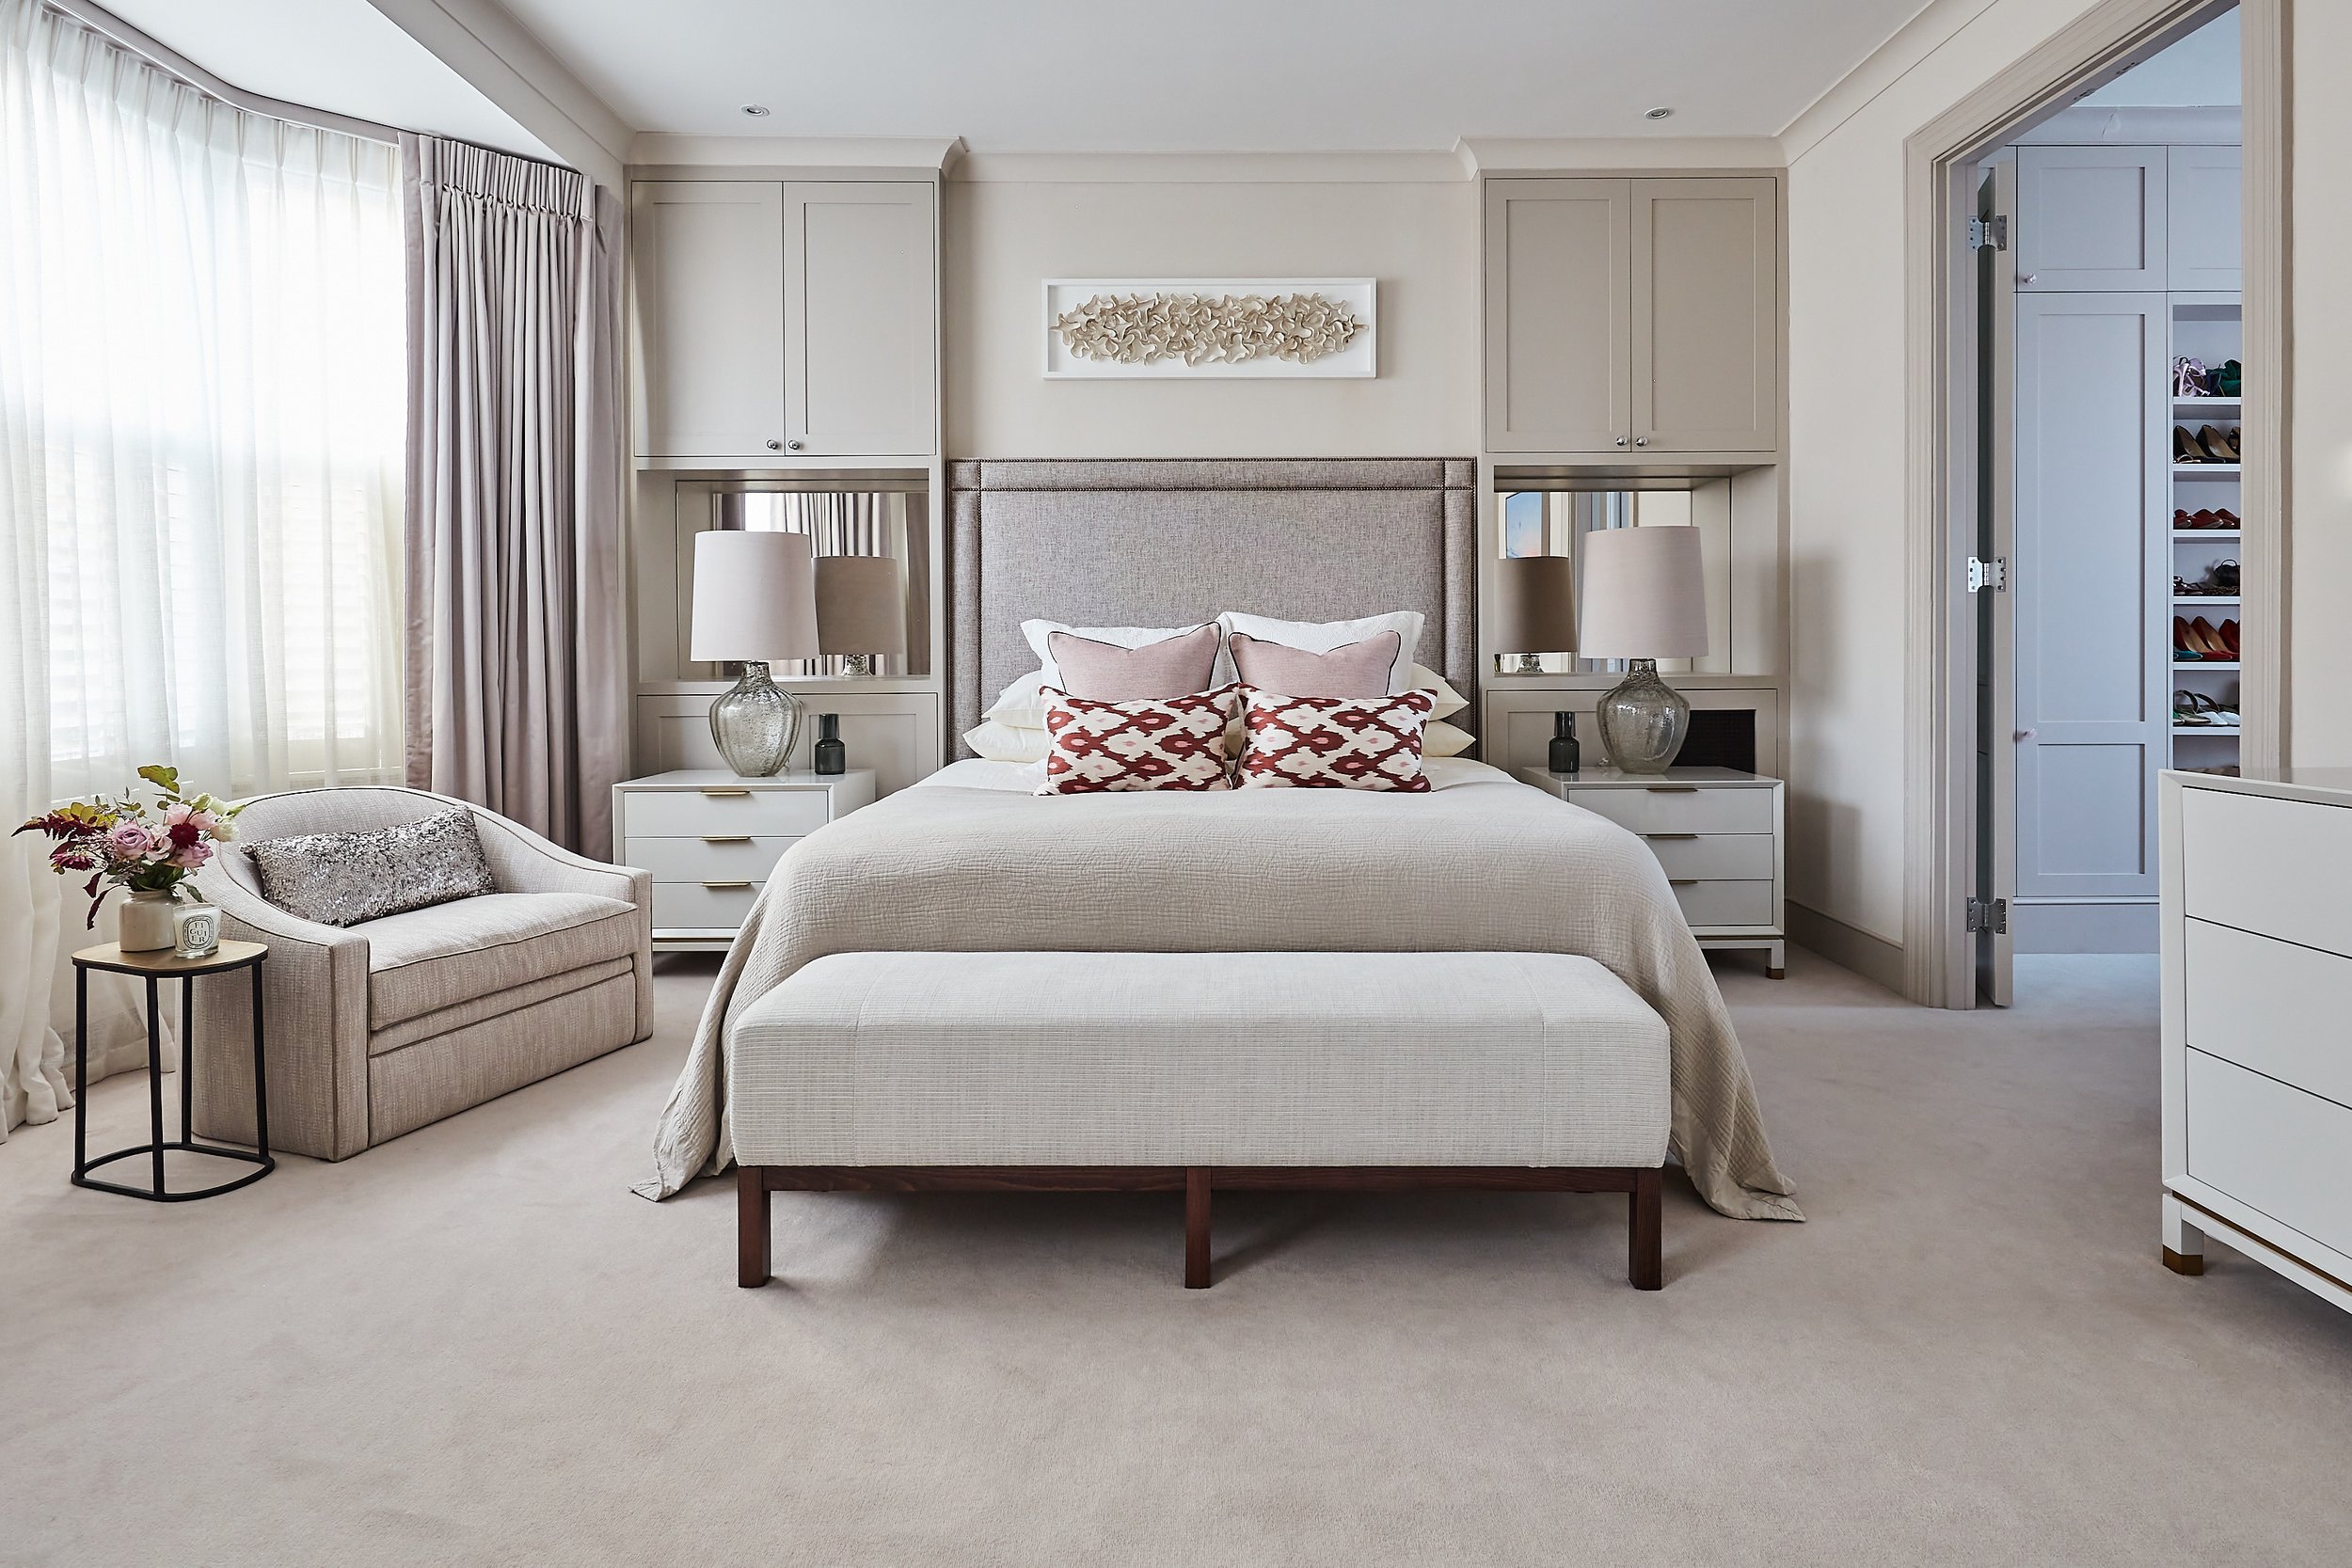 014 MASTER BED WANDSWORTH HOUSE BY HENRY PRIDEAUX.jpg